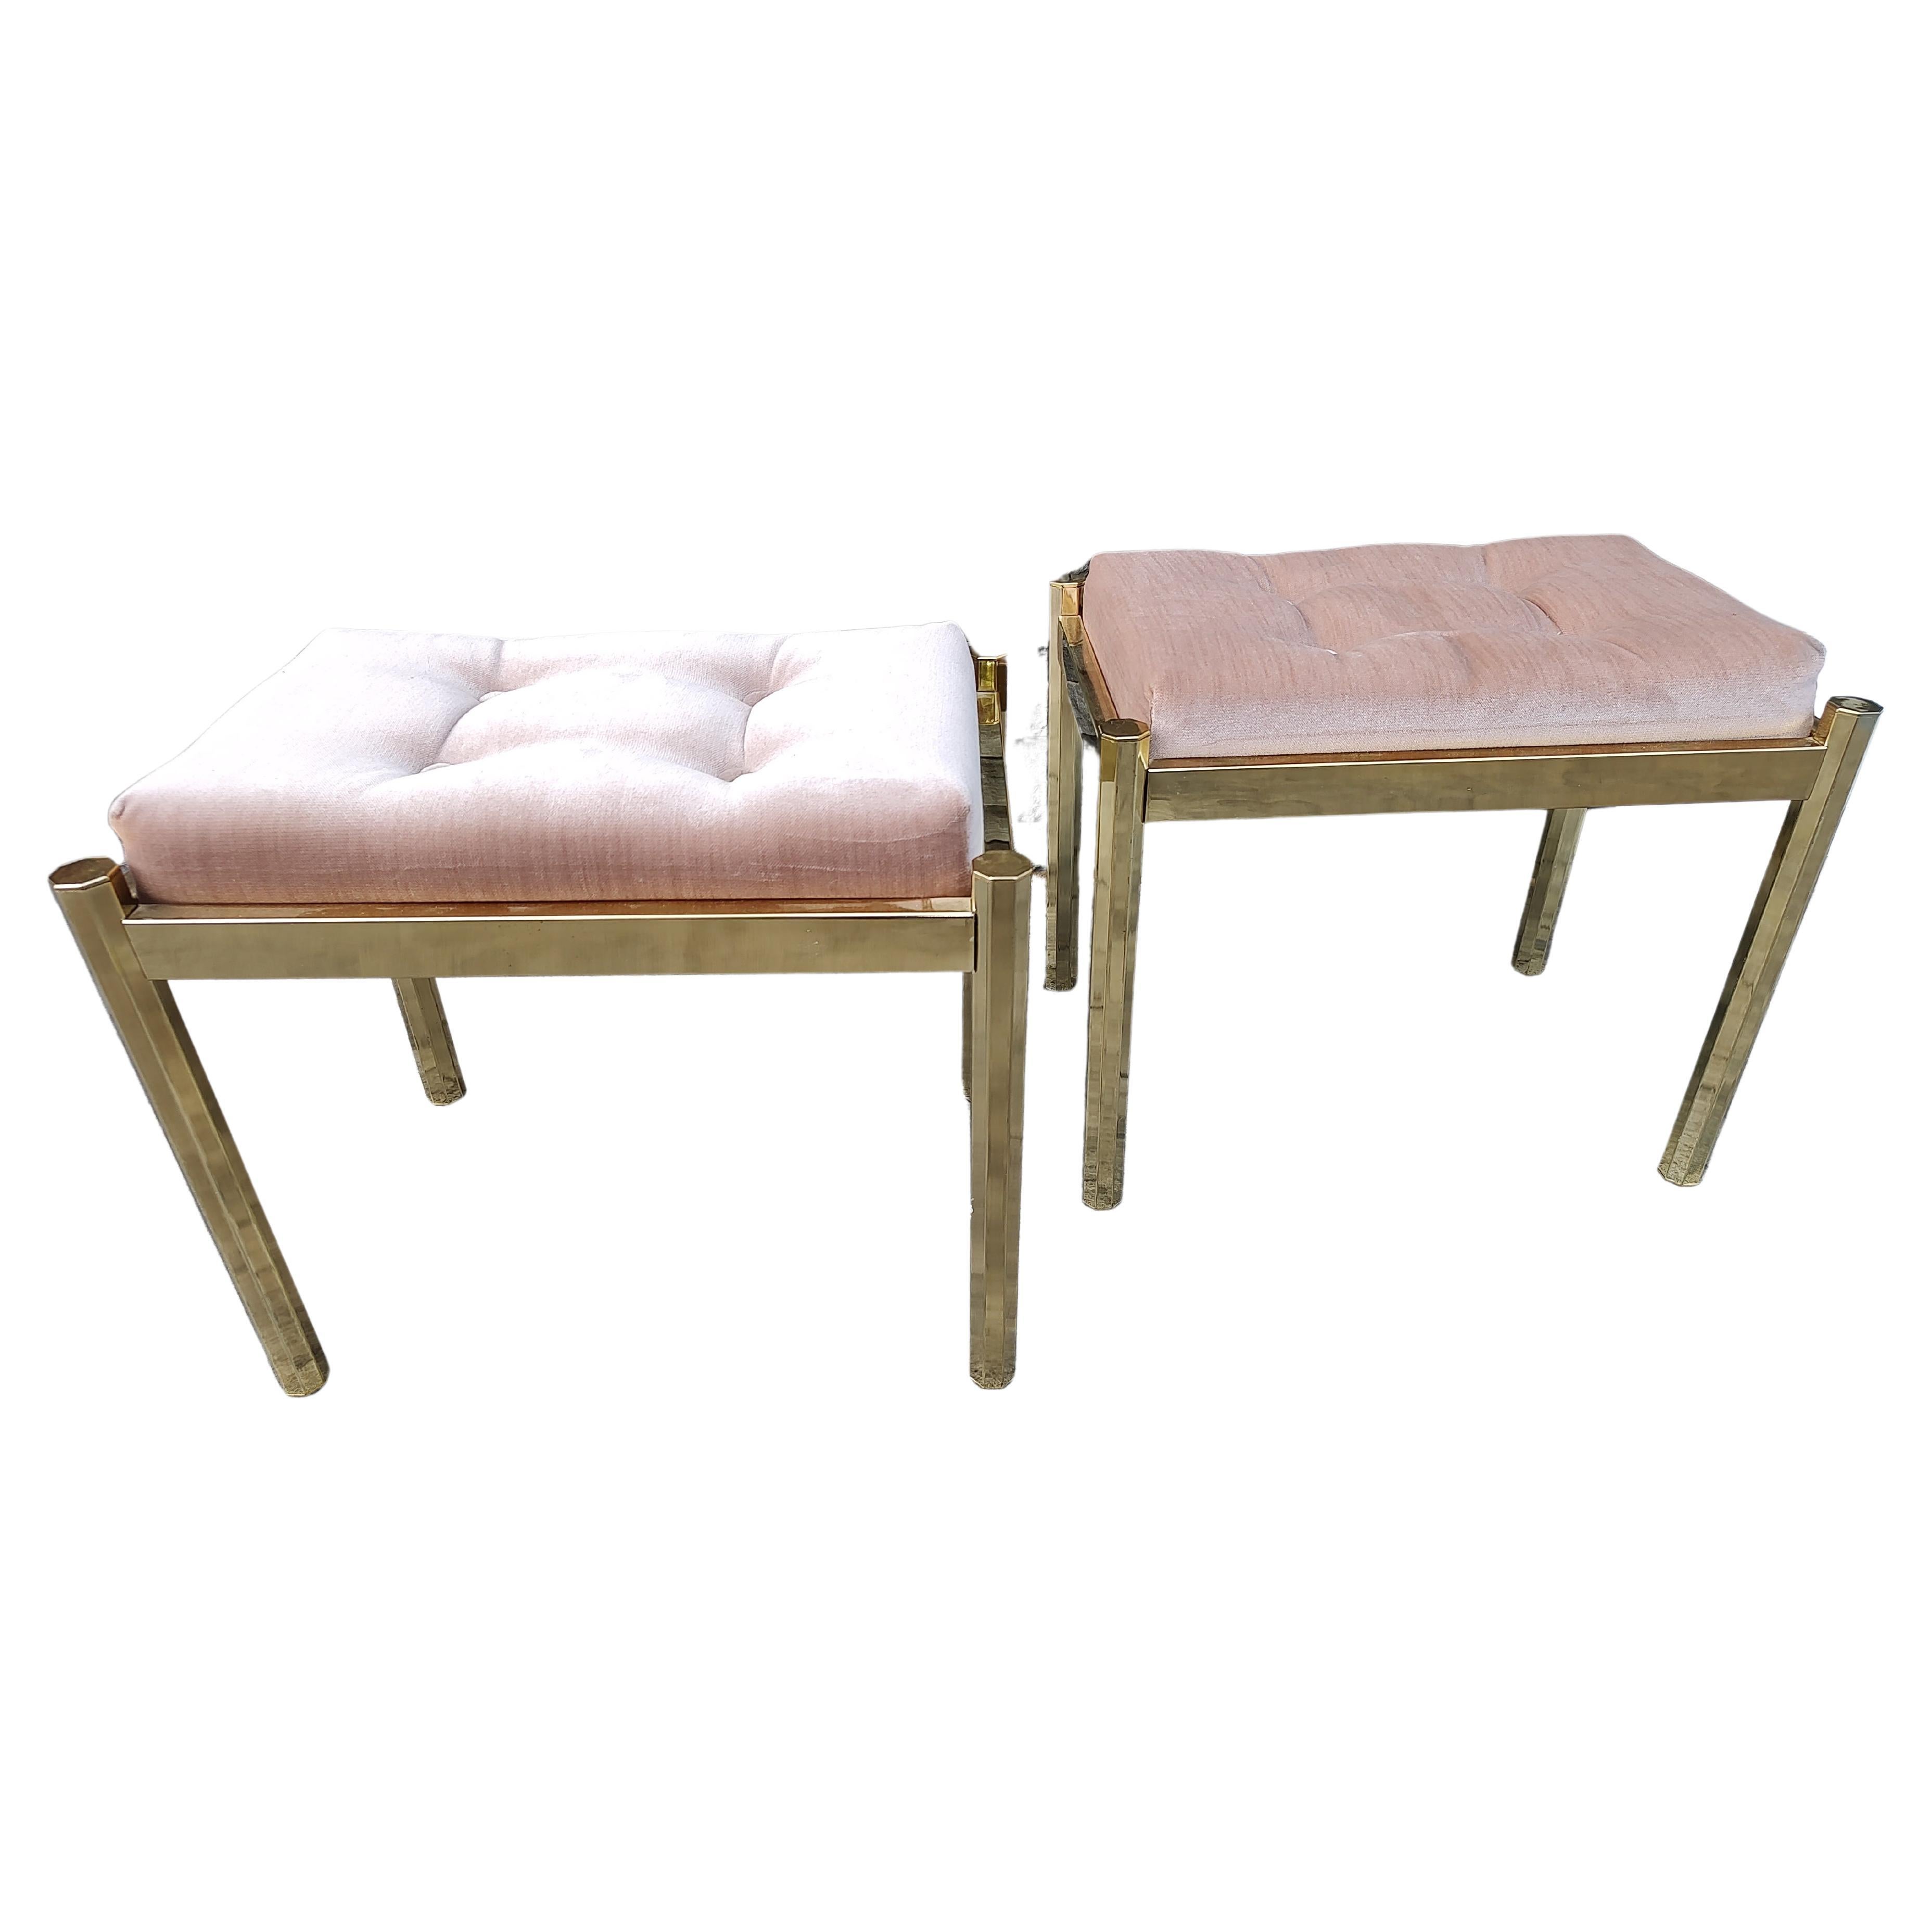 Simple and elegant pair of Mid-Century Modern brass benches with octagonal legs and a tufted seat. In excellent vintage condition with minimal wear. Sold and priced as a pair. Can be parcel posted.